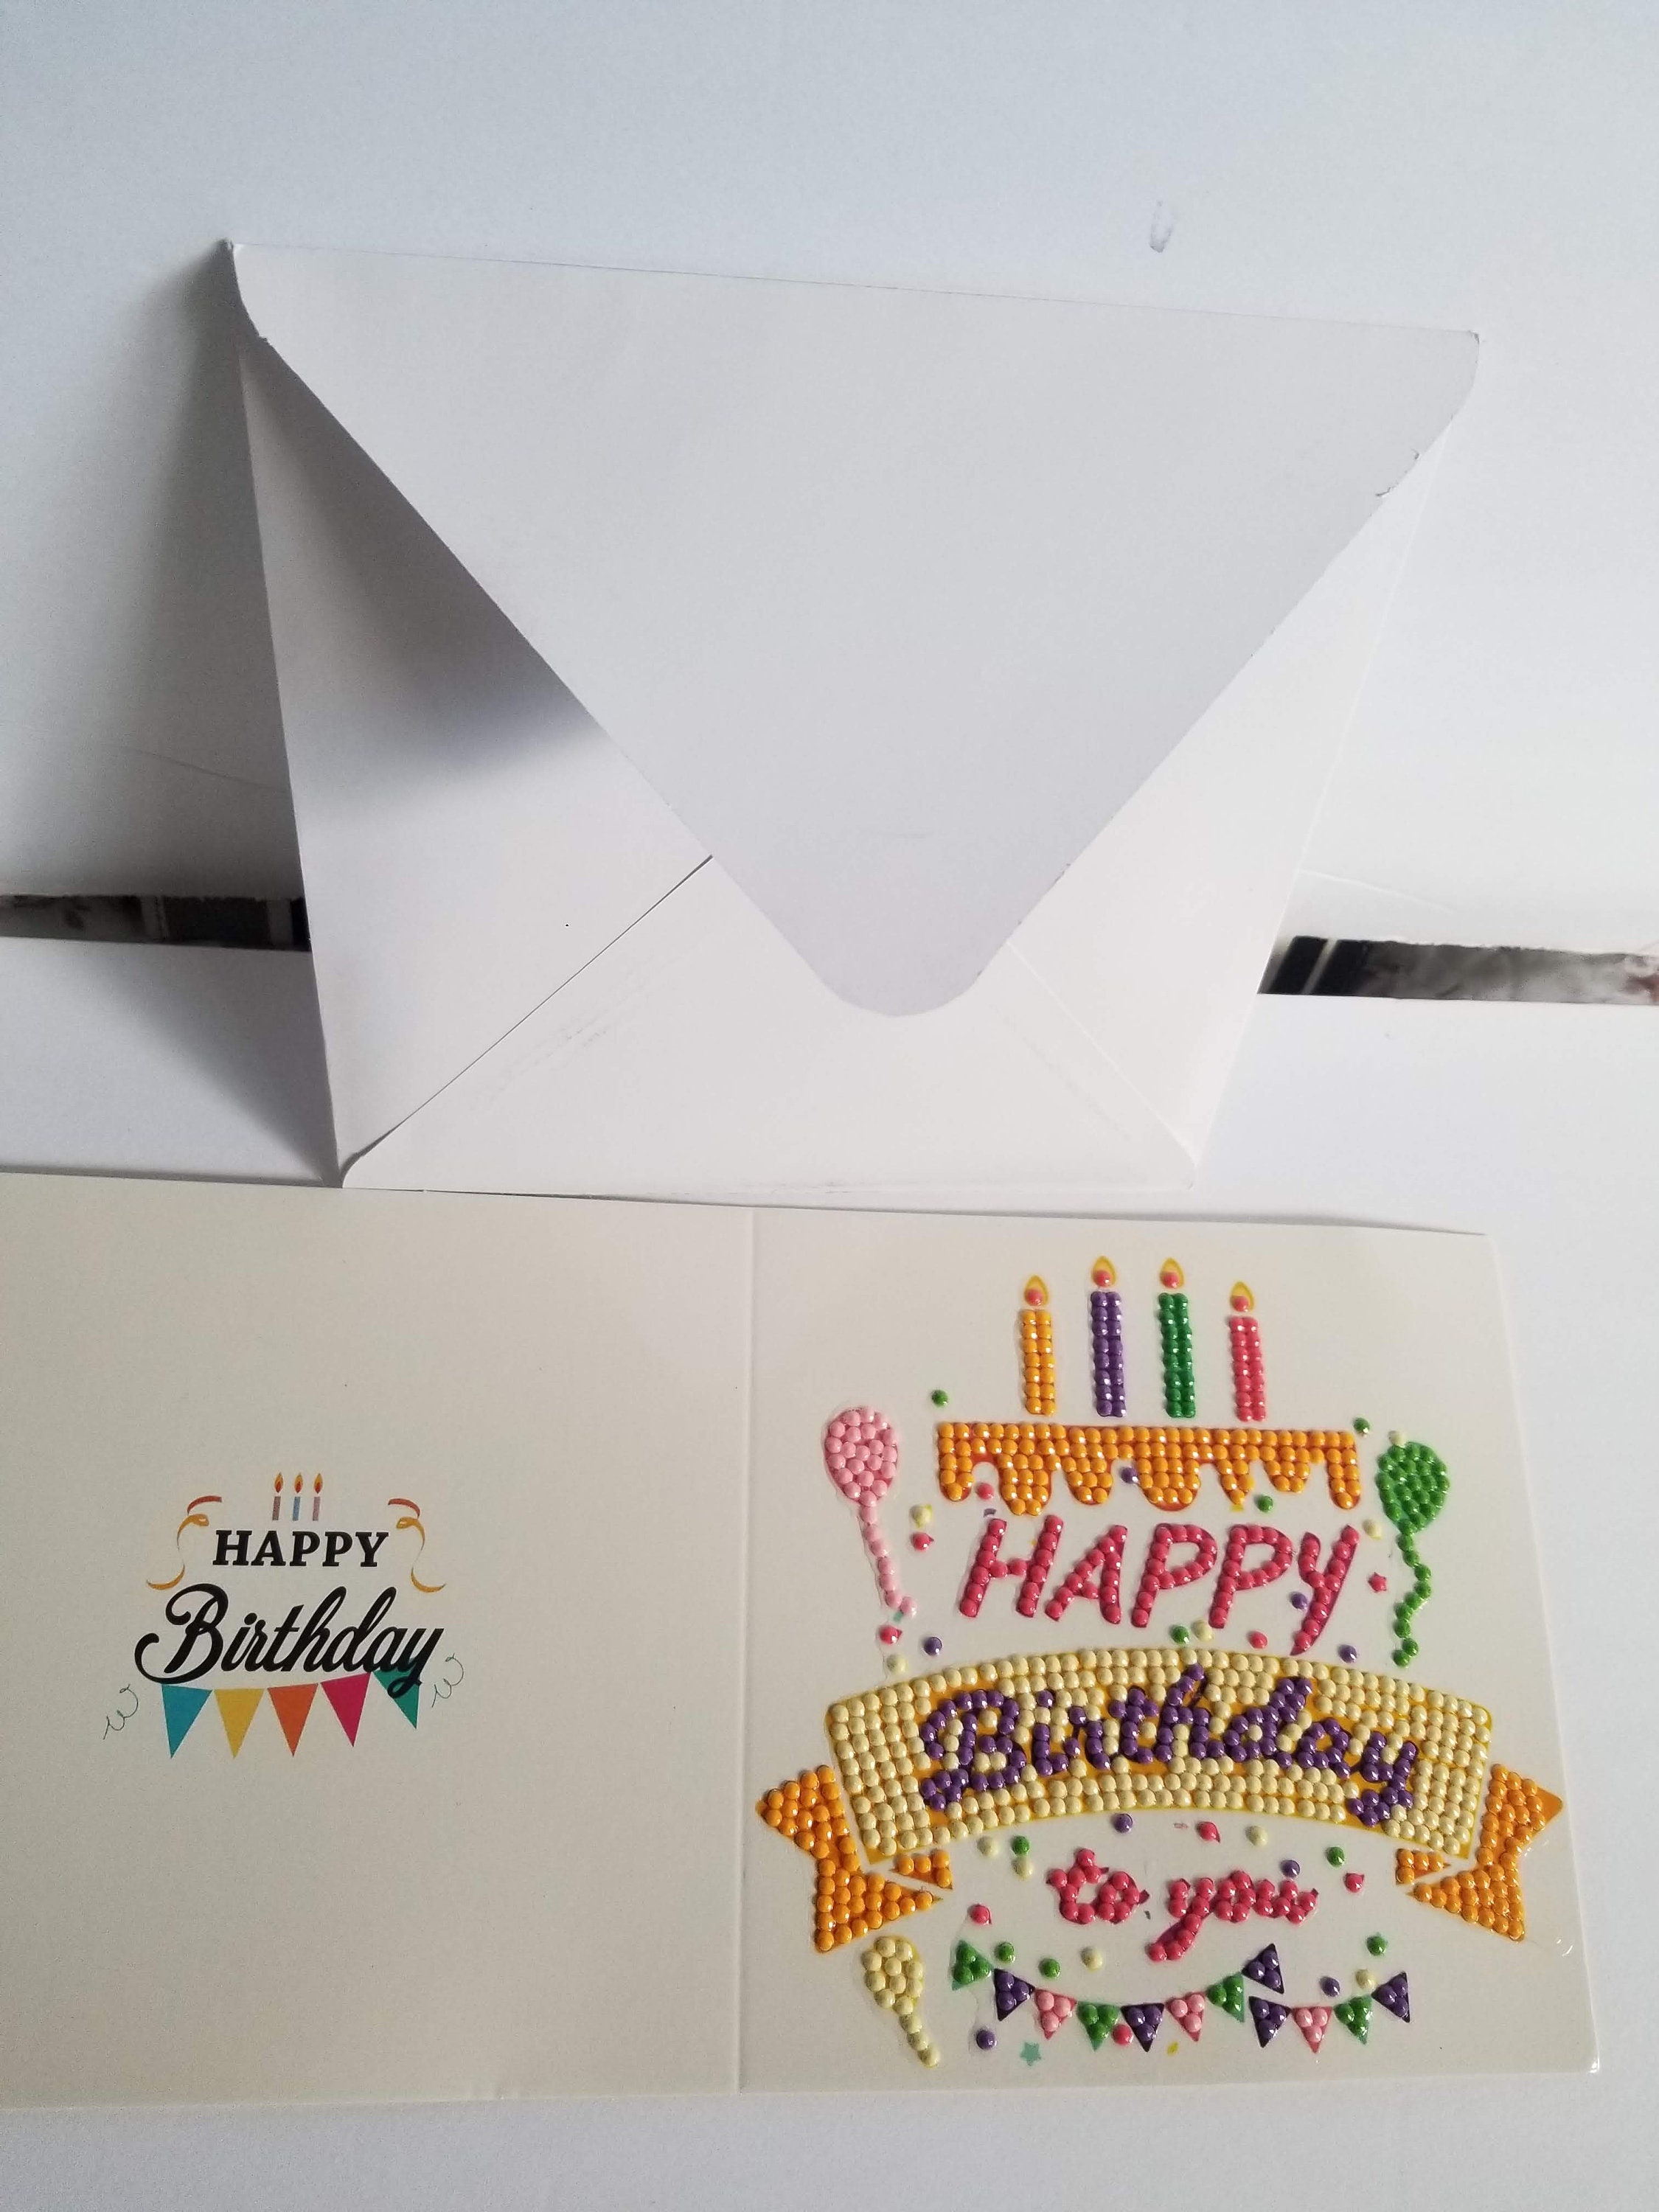 Diamond Painting Card Best Wishes. Happy Birthday. Postcards Envelop. Gift.  Varnished to Protect. Free Shipping -  Australia